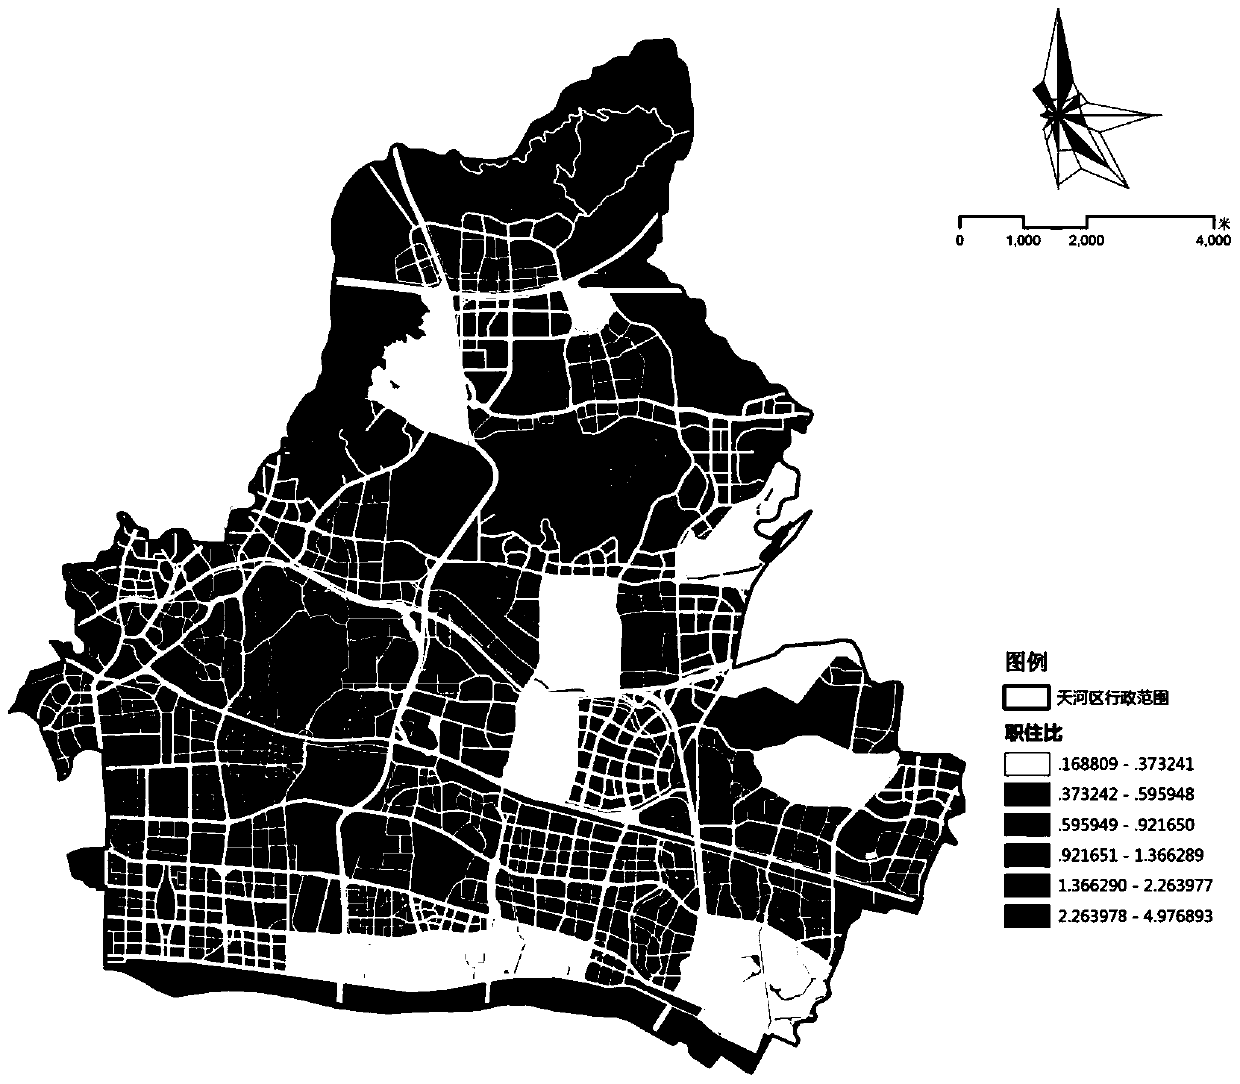 A method for identifying parking spaces in residential areas to match social parking needs based on open source data